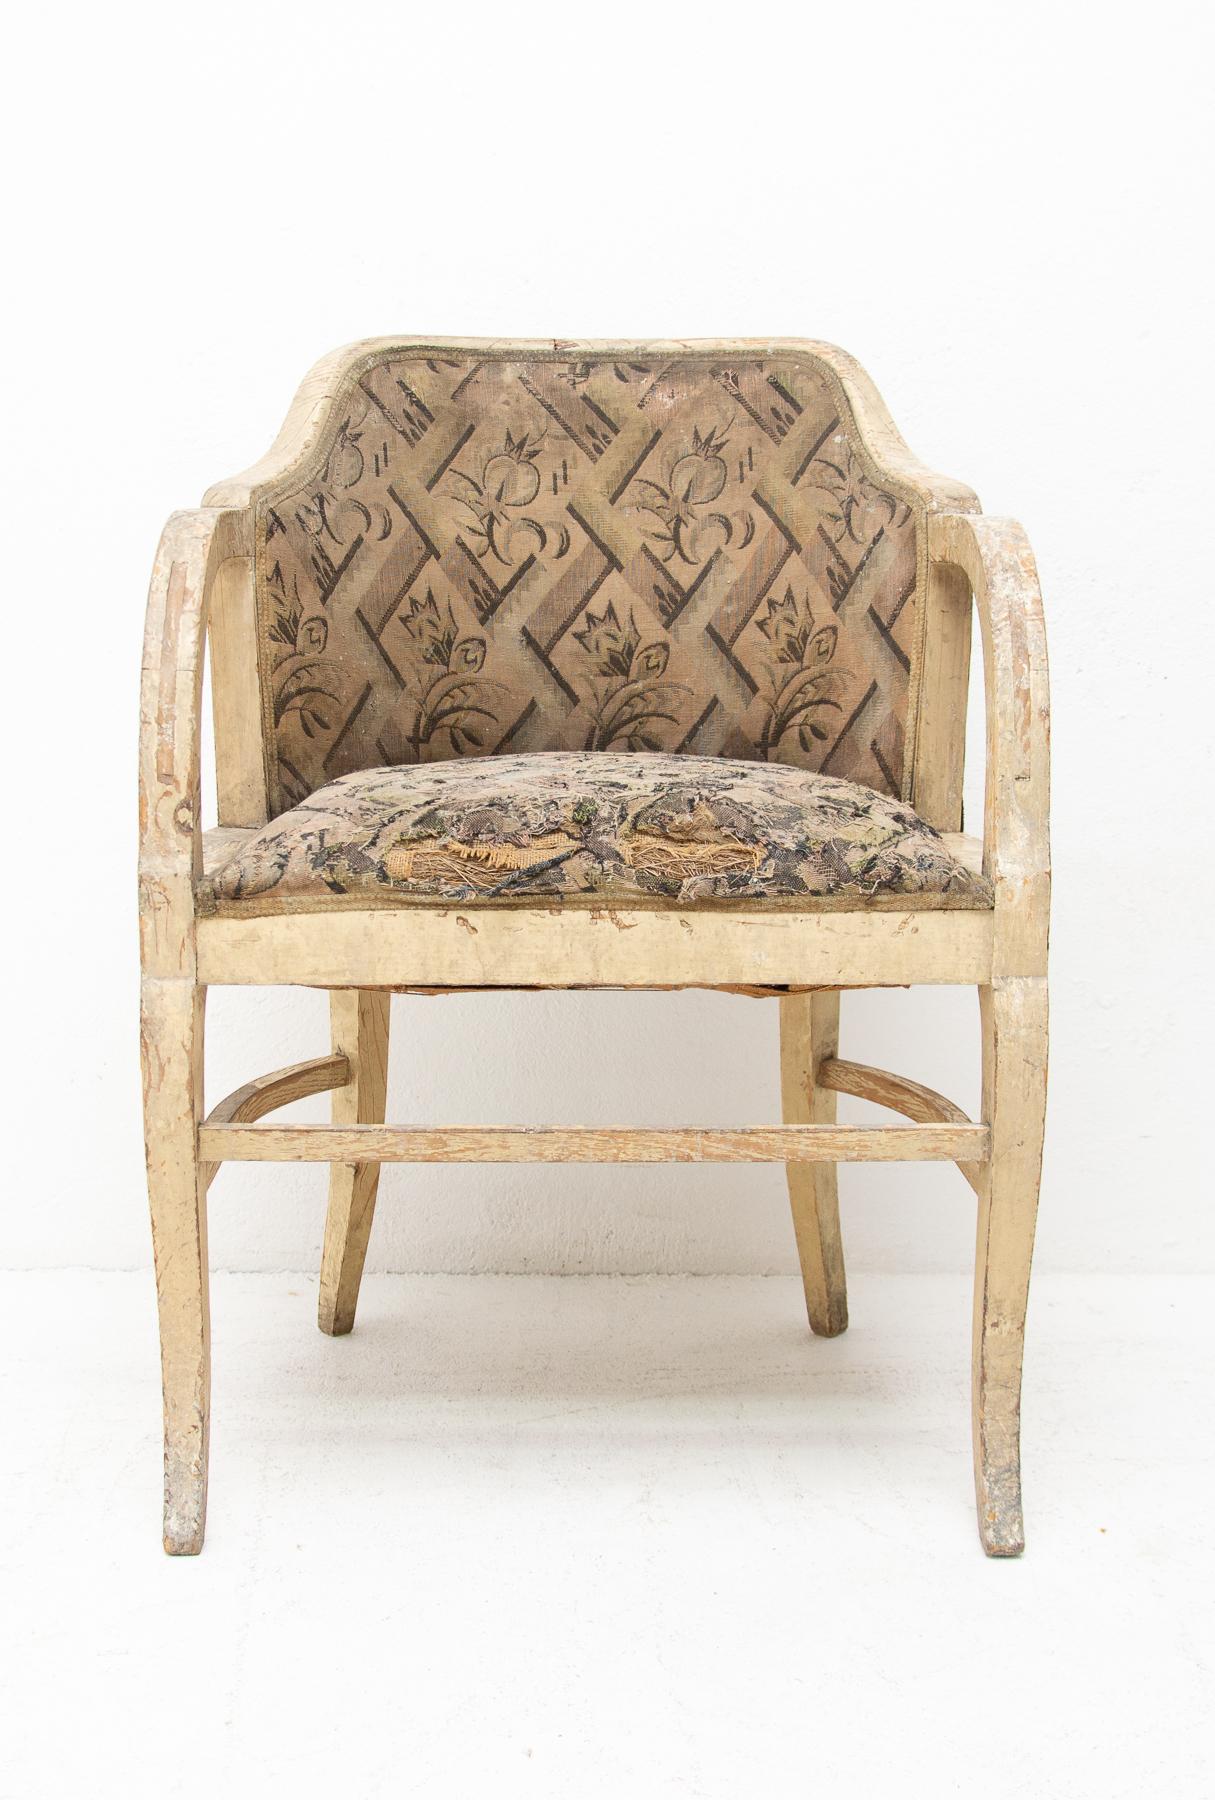 A very interesting armchair from the Art Nouveau period. We could not find the author. The chair is in its original condition with considerable signs of age and use. However, if you are interested, we offer a complete renovation of the chair